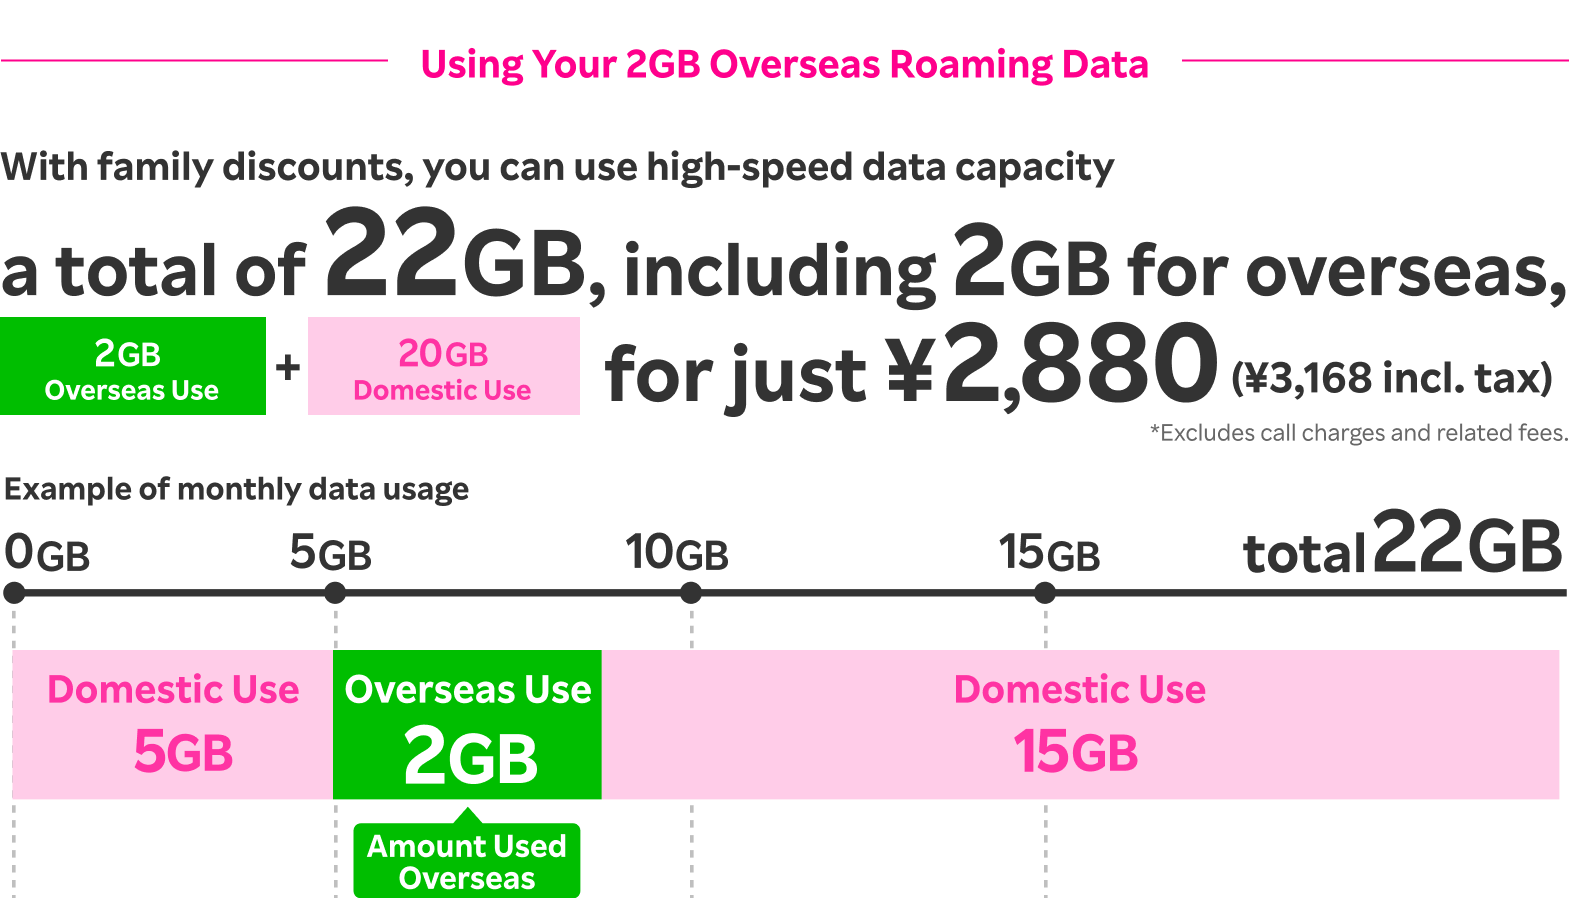 Example of Overseas Roaming with 2GB Usage: When using a total of 22GB of high-speed data, the cost is just 2,880 yen (3,168 yen incl. tax) with a family discount applied!